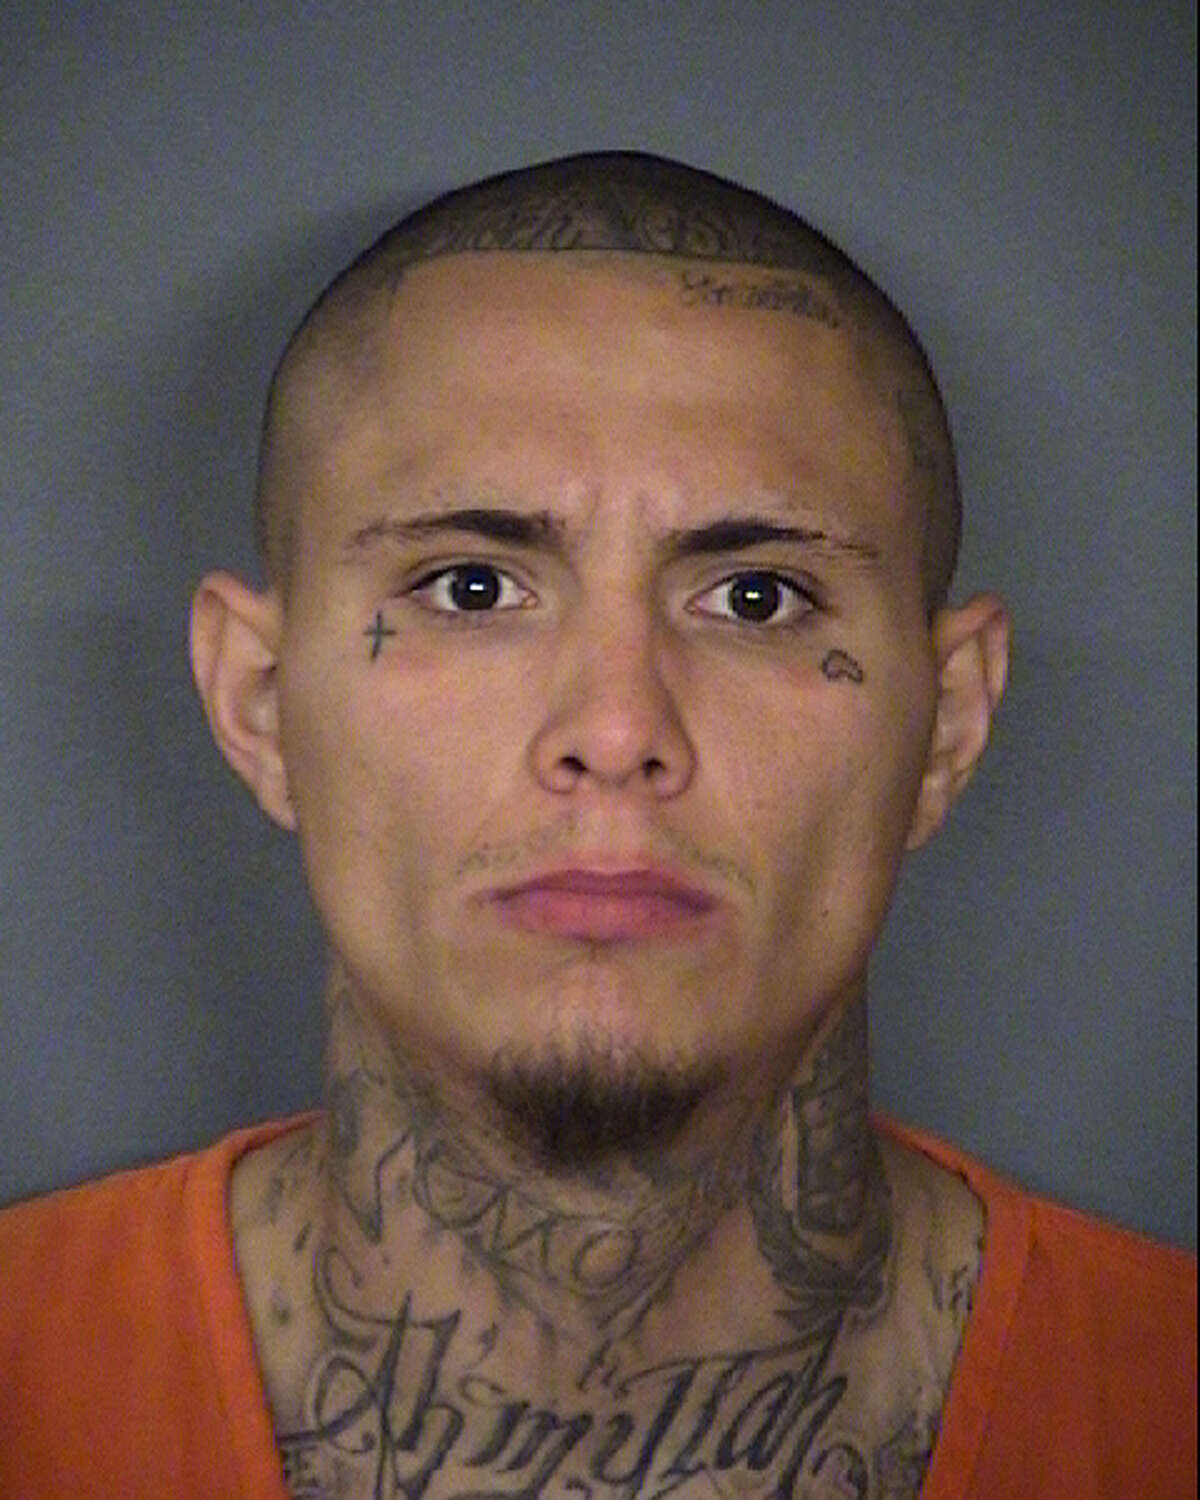 Jesus Longoria, 26, was charged with aggravated kidnapping on March 1, 2017.